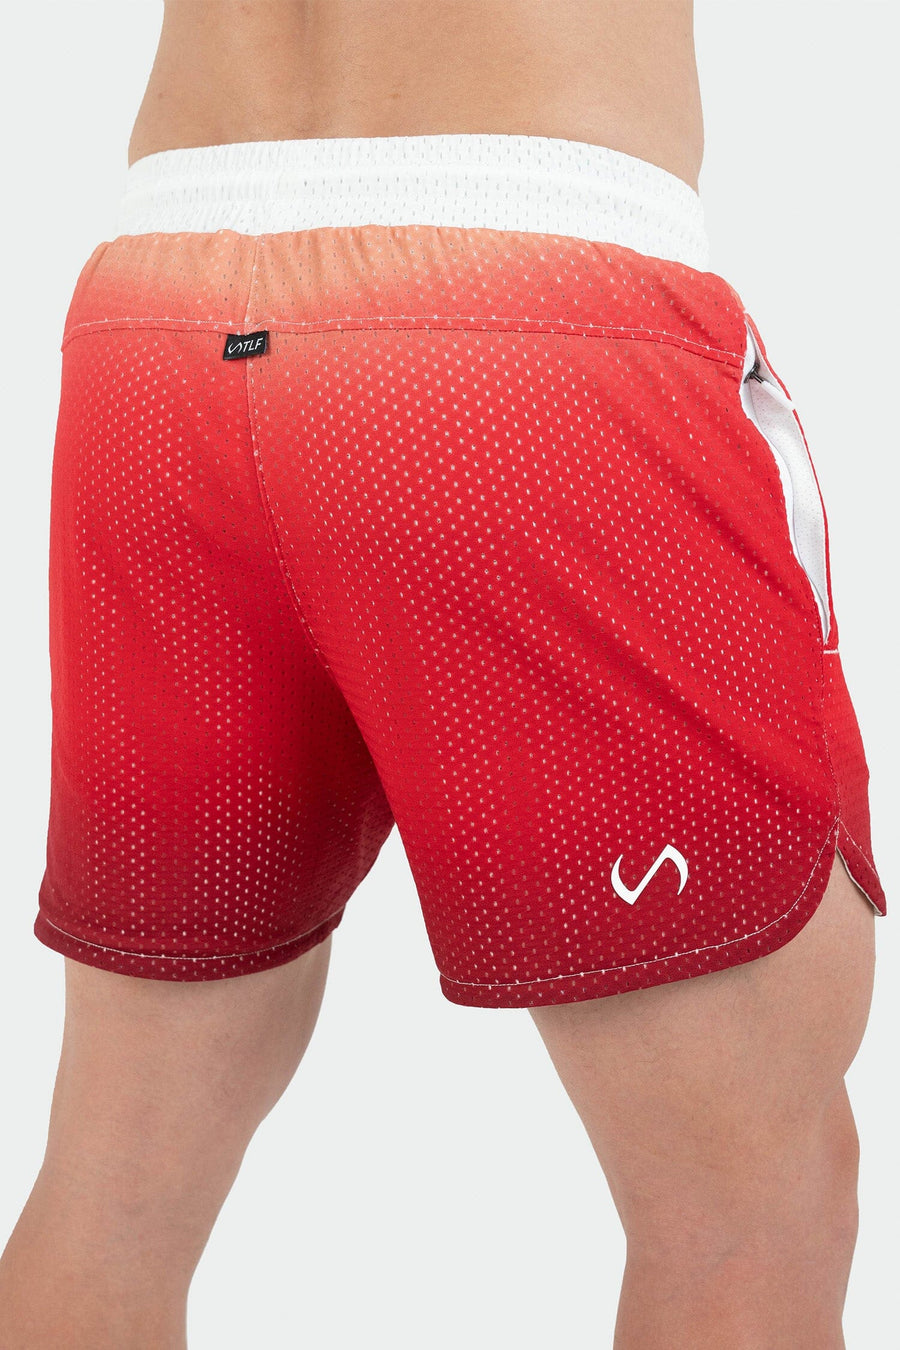 TLF Gts Ombre Mesh 5” Shorts Red Ombre 5